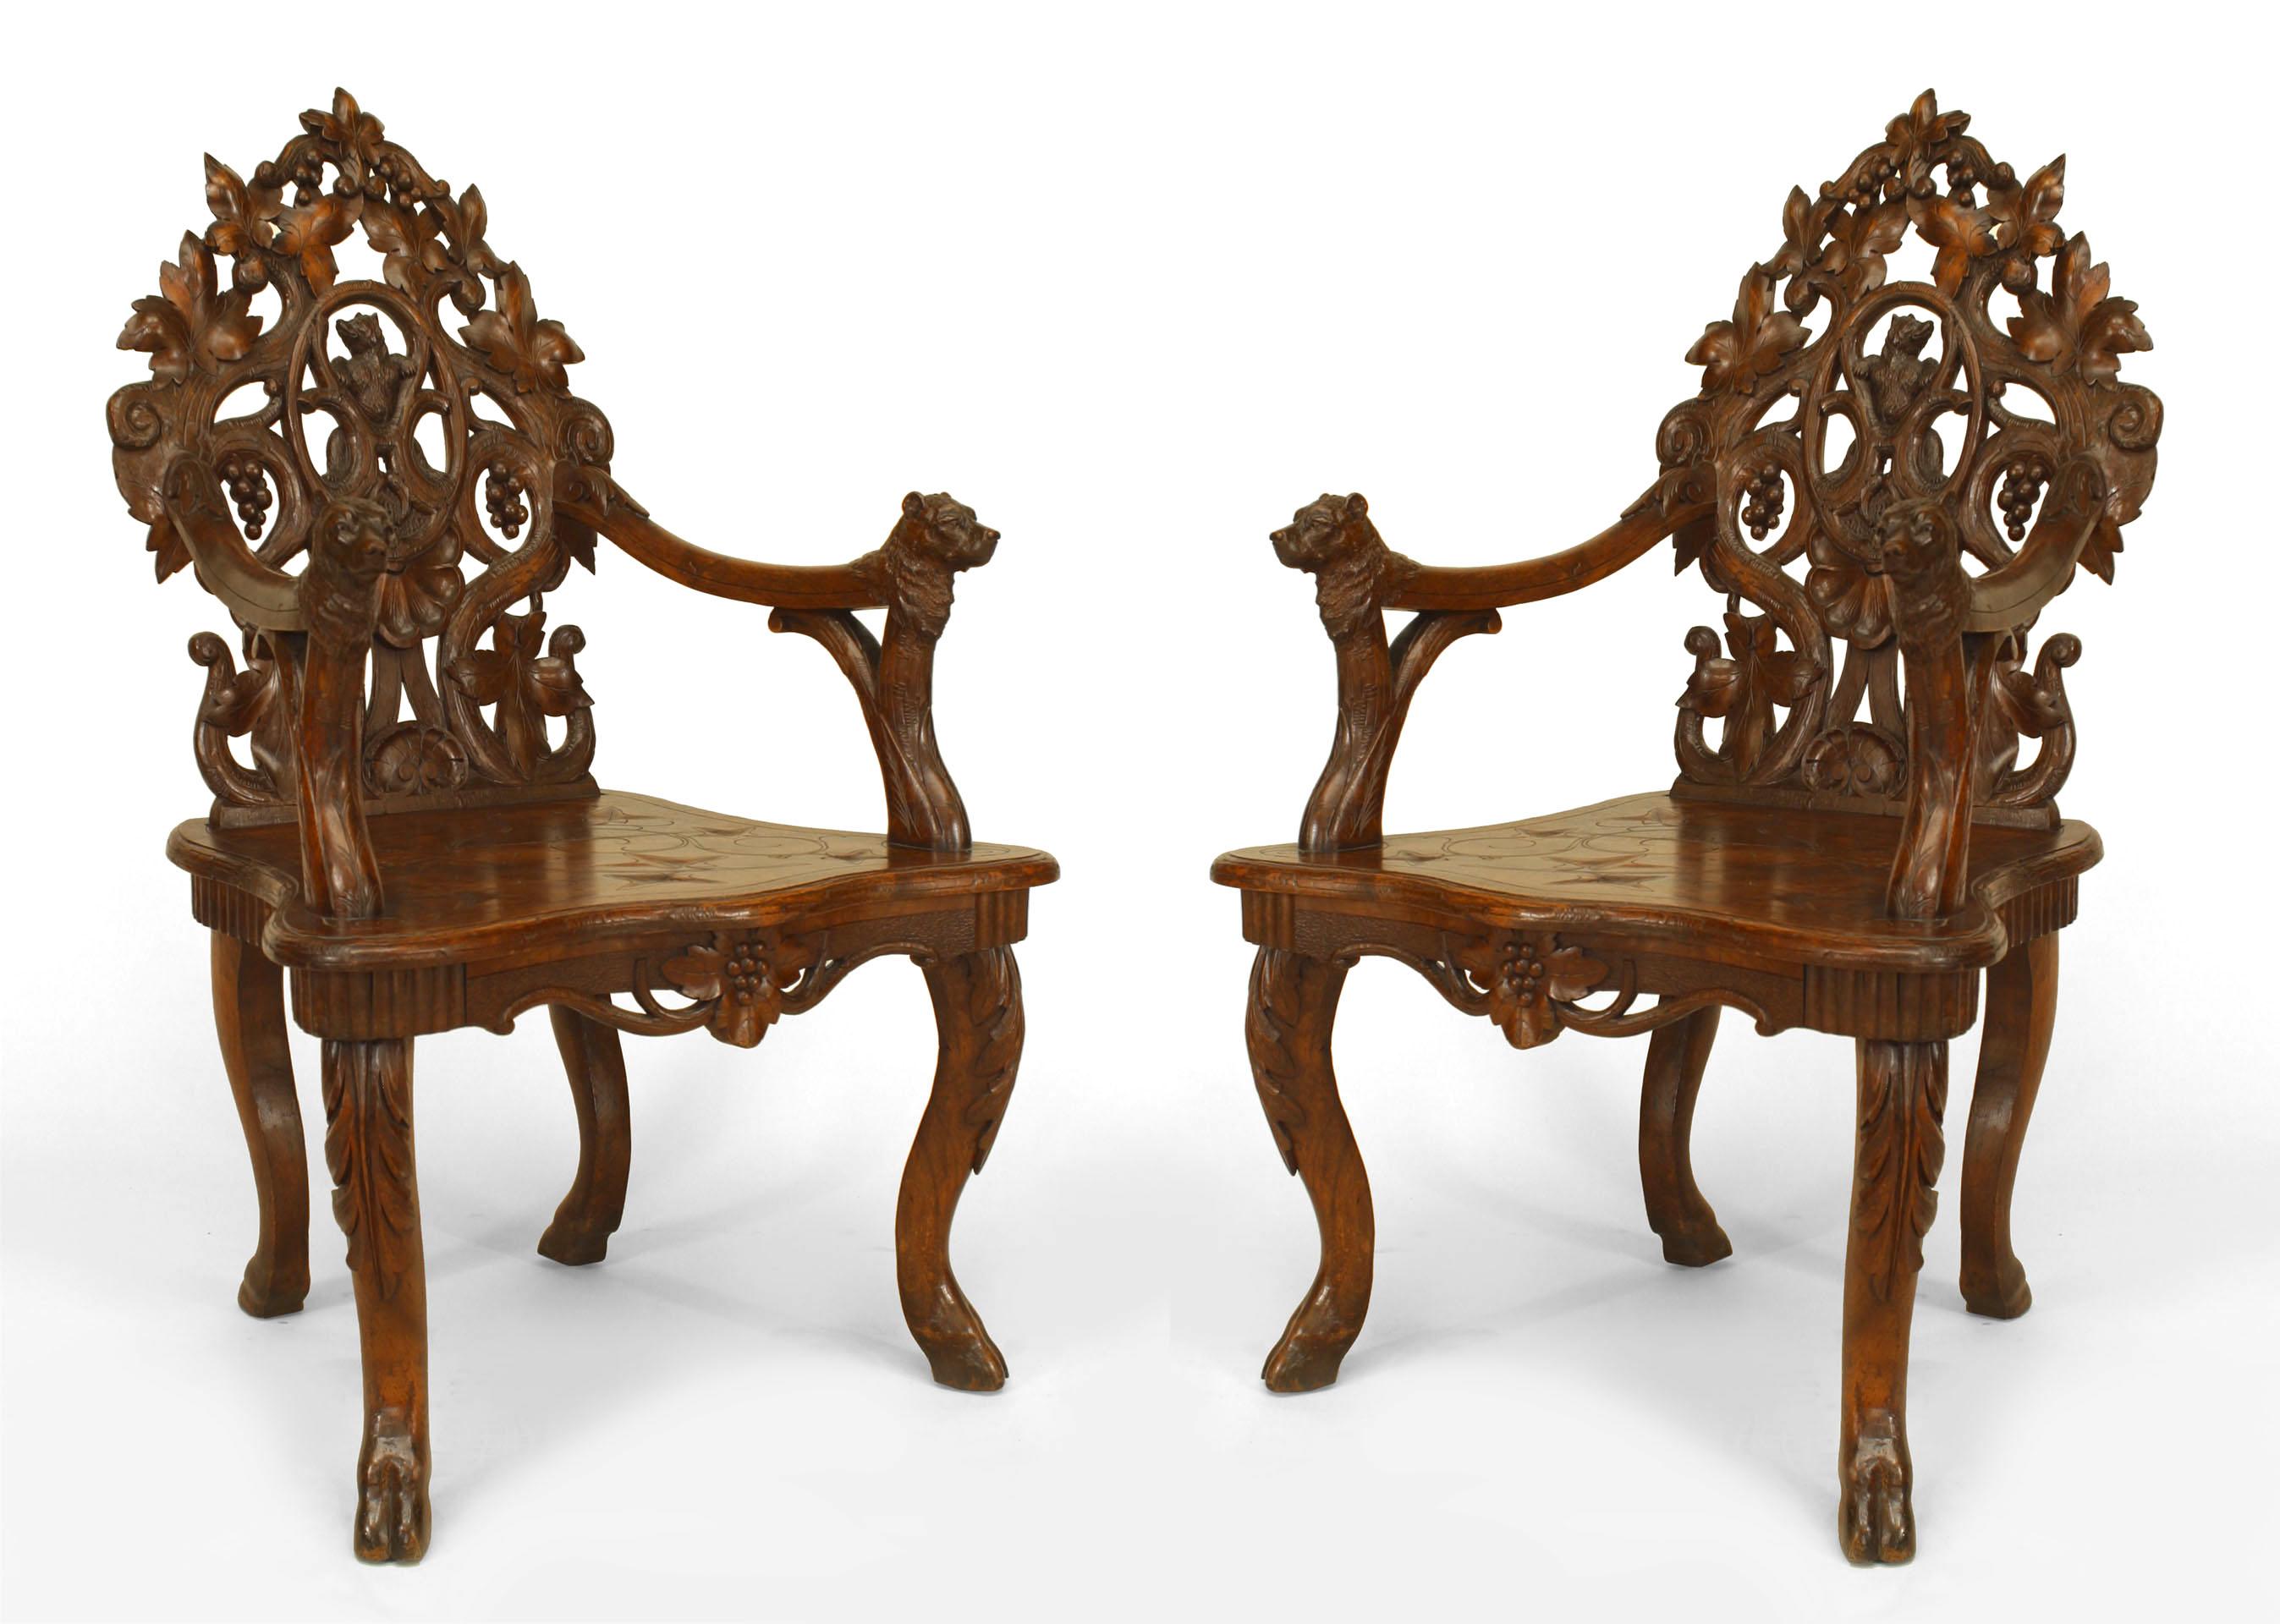 Pair of Rustic Black Forest (19th Cent) carved walnut open Armchairs with leaf and grape design filigree back and bear heads on arms with etched seat
